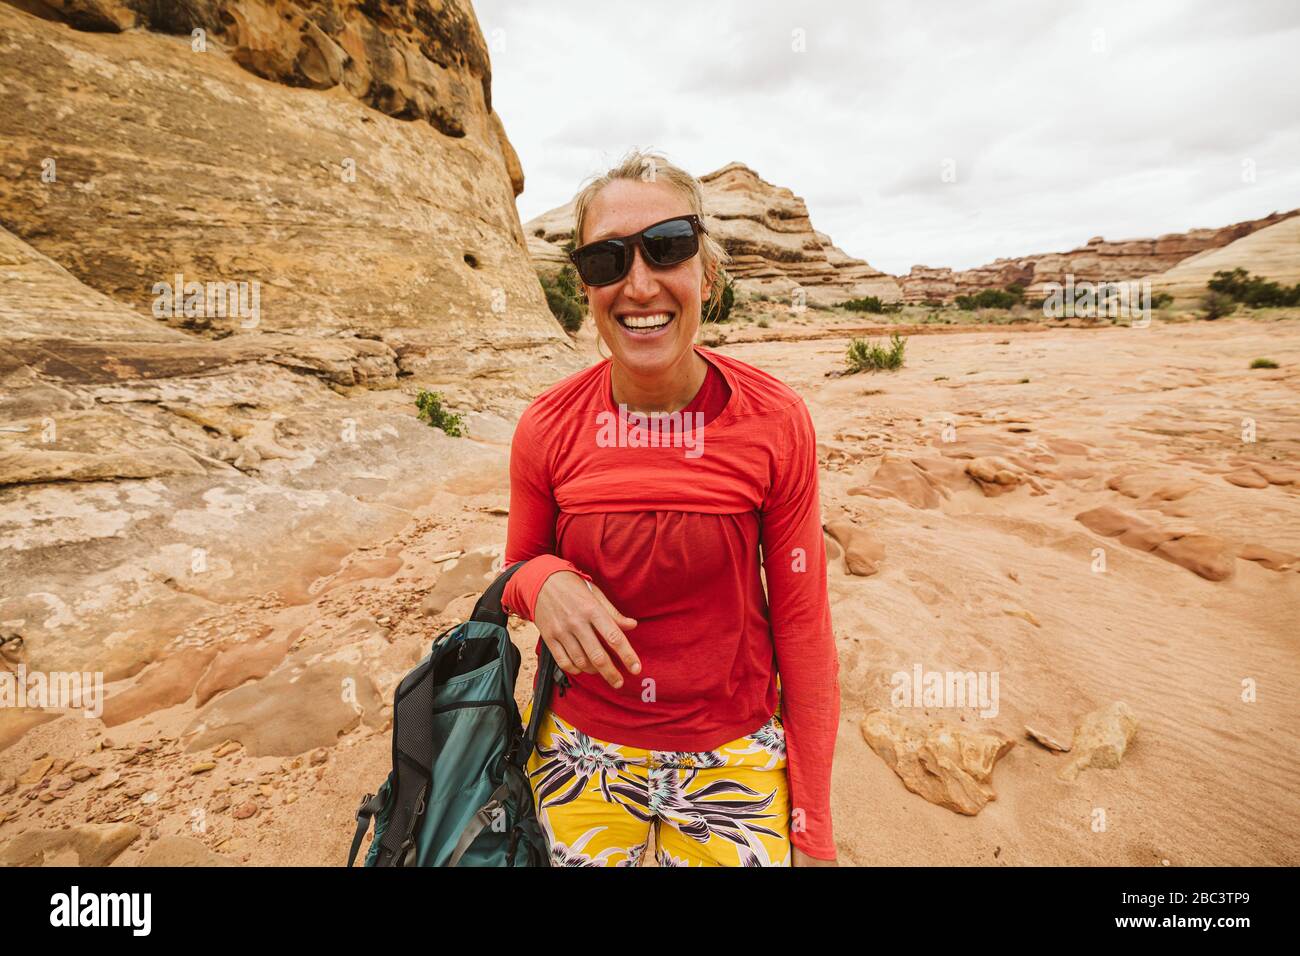 desert hiker with slanted sunglasses and messup up shirt laughing Stock Photo